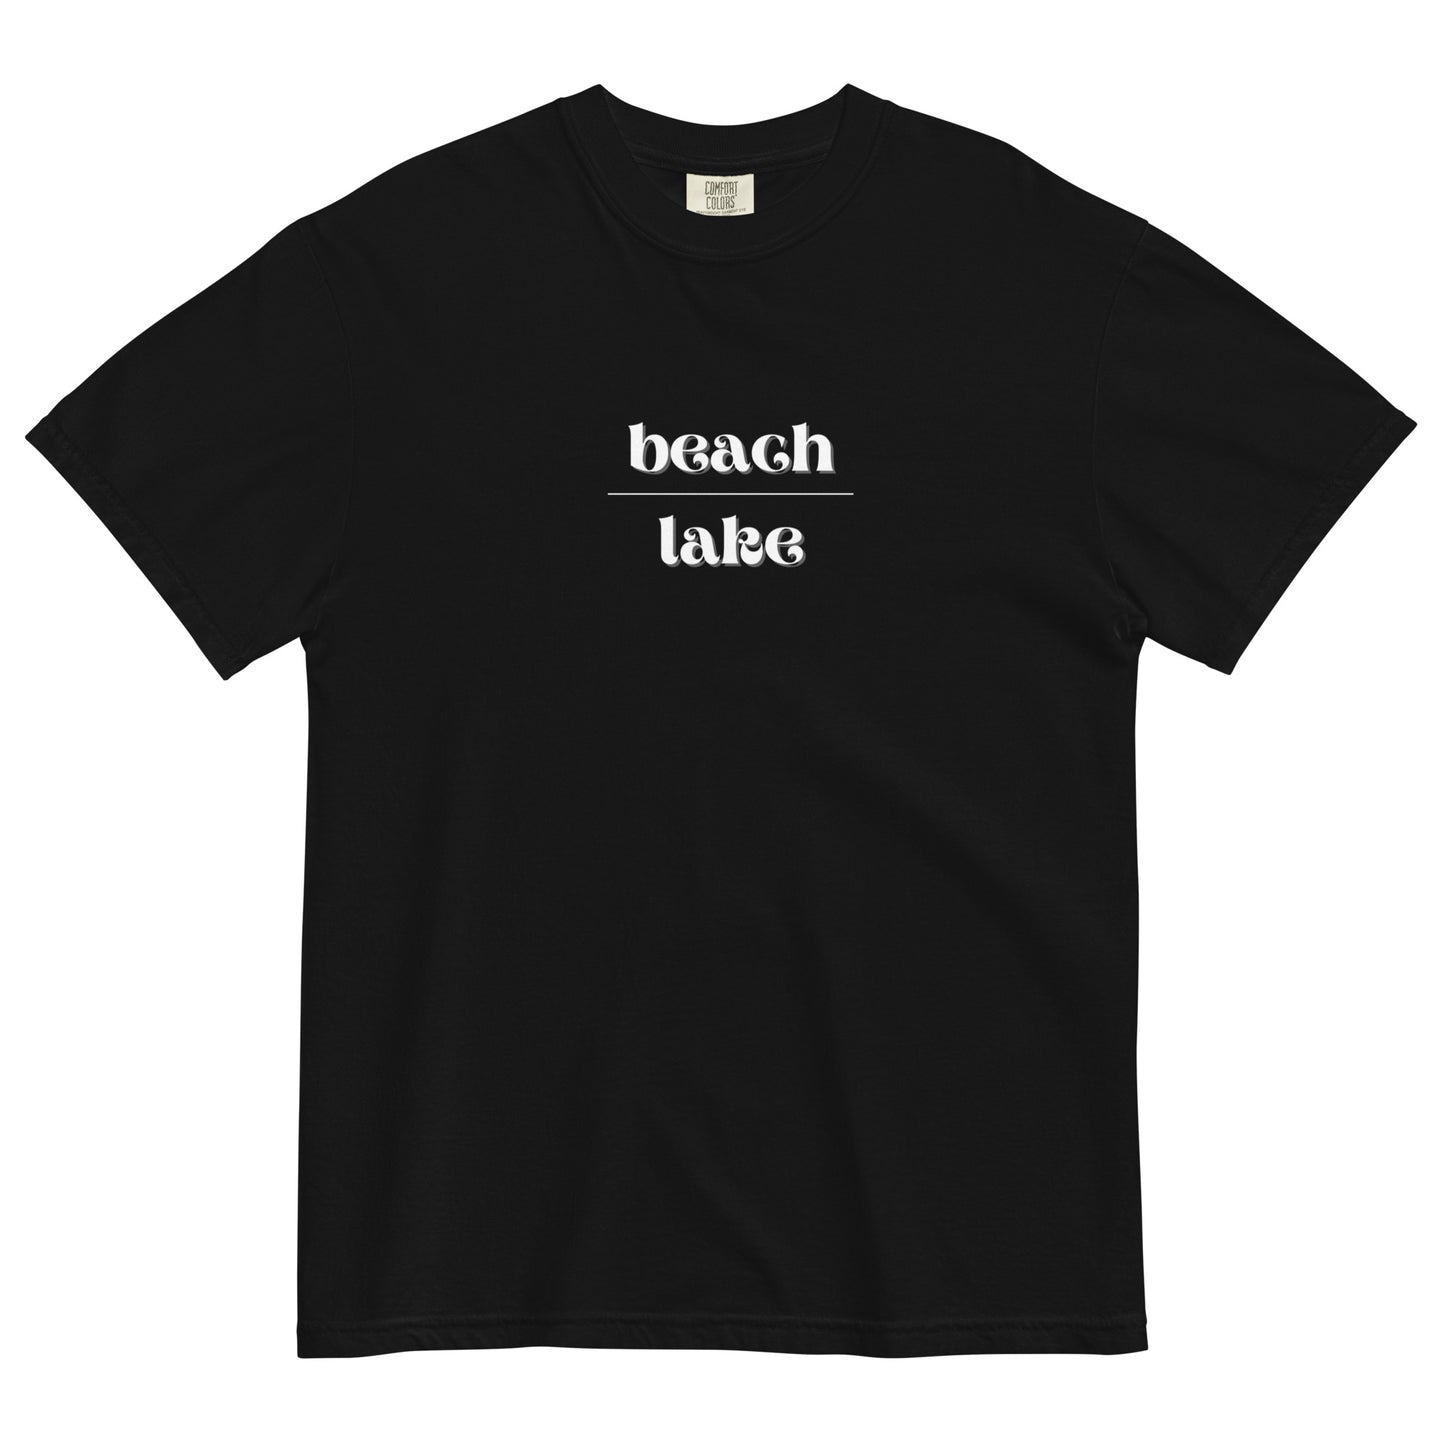 black tshirt that says "beach over lake" in white letters